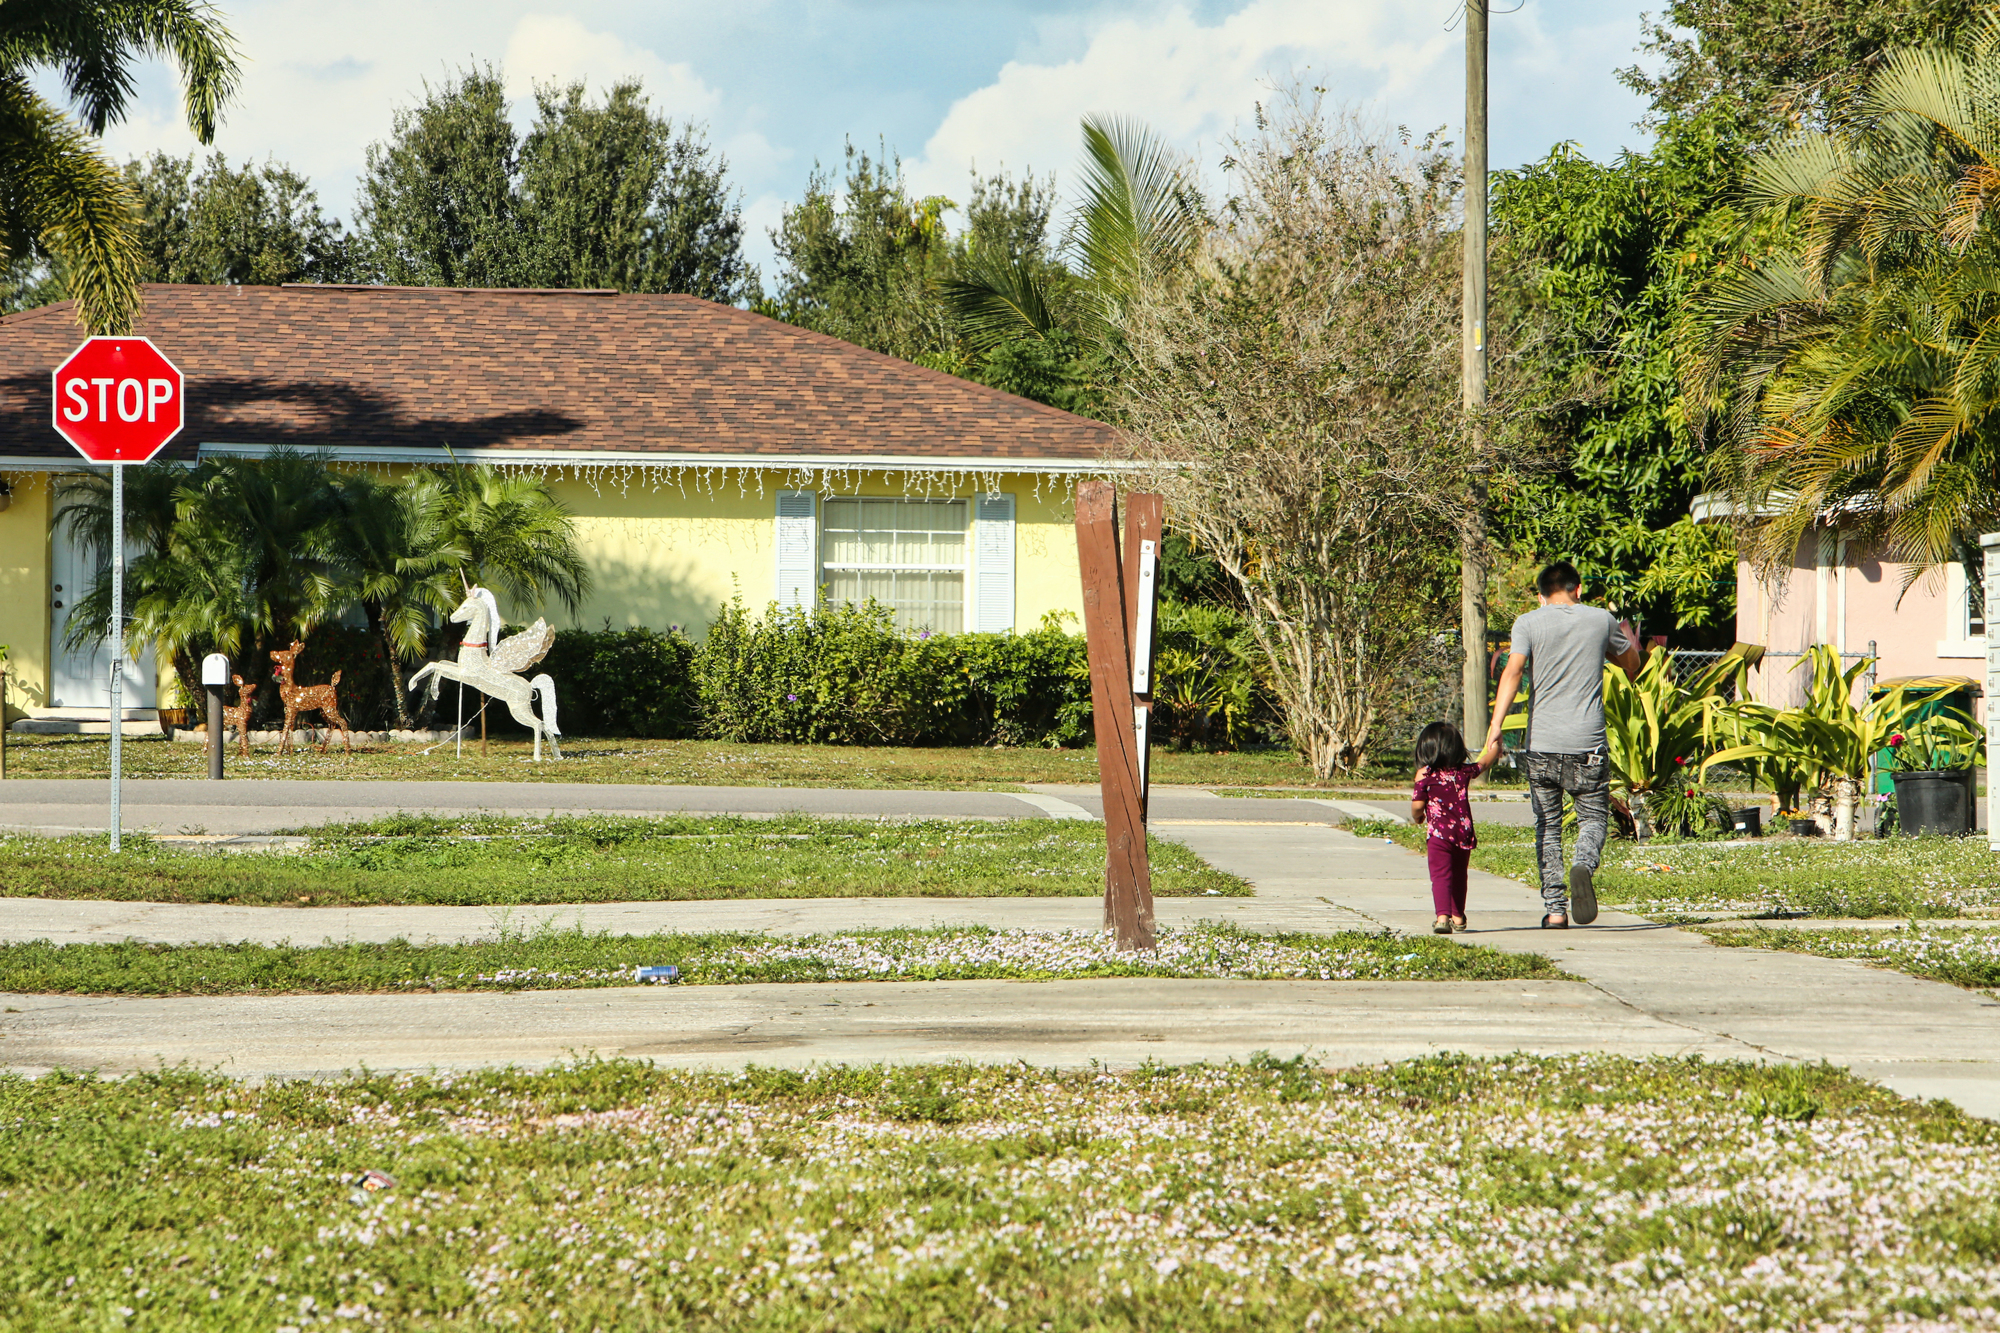 STEFANIA PIFFERI — A new apartment development under construction in Immokalee will give low-income families with few options opportunities.